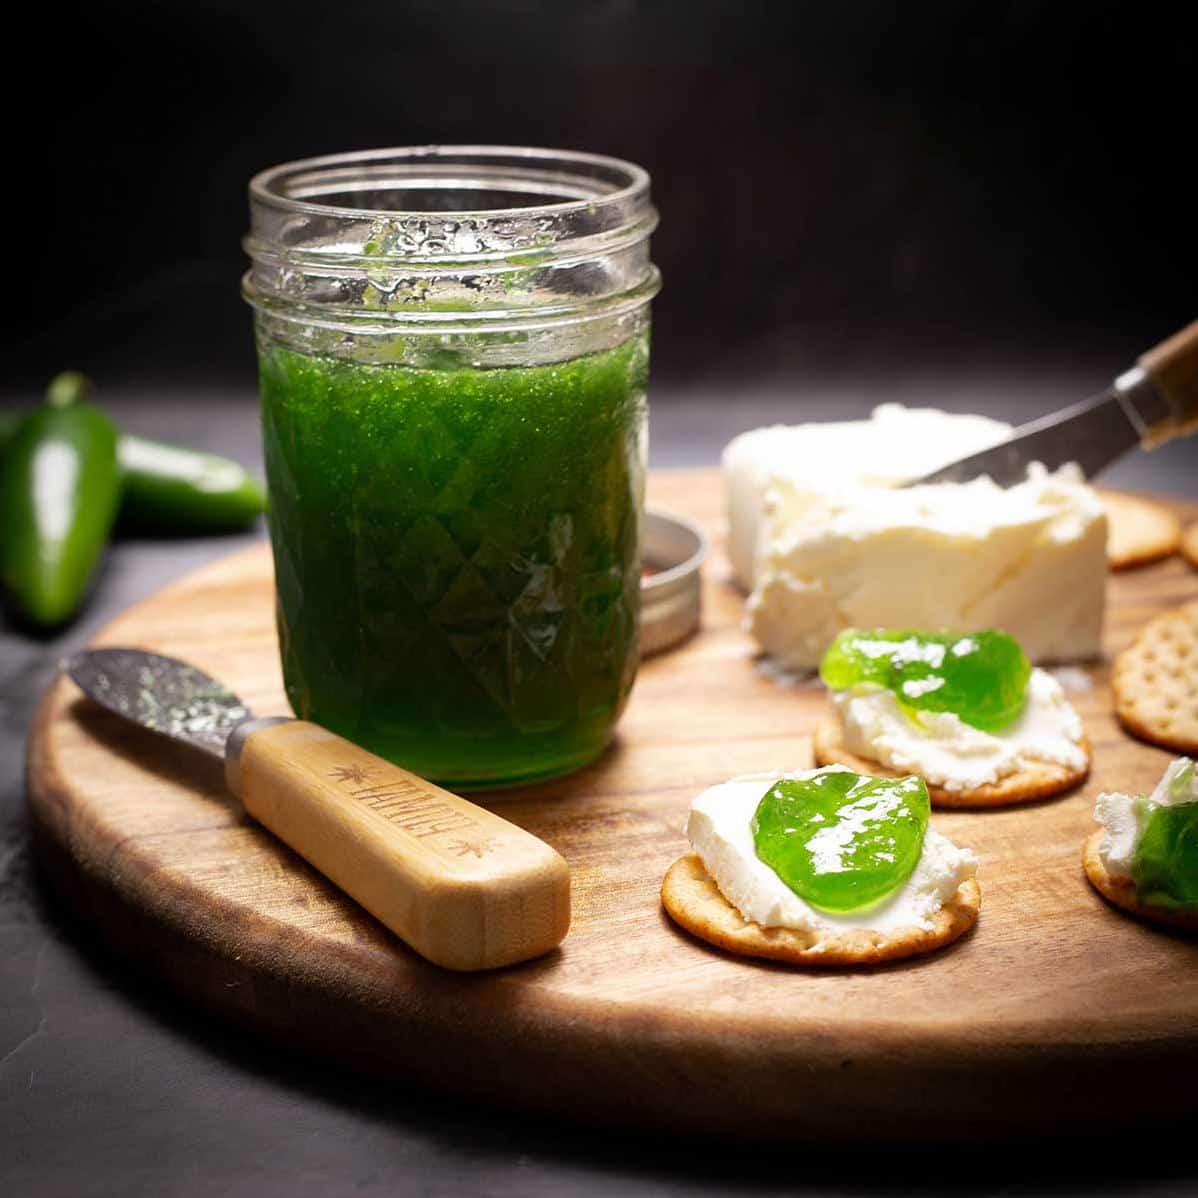  Add a pop of color and flavor to your charcuterie board with this green chili-pepper jelly.